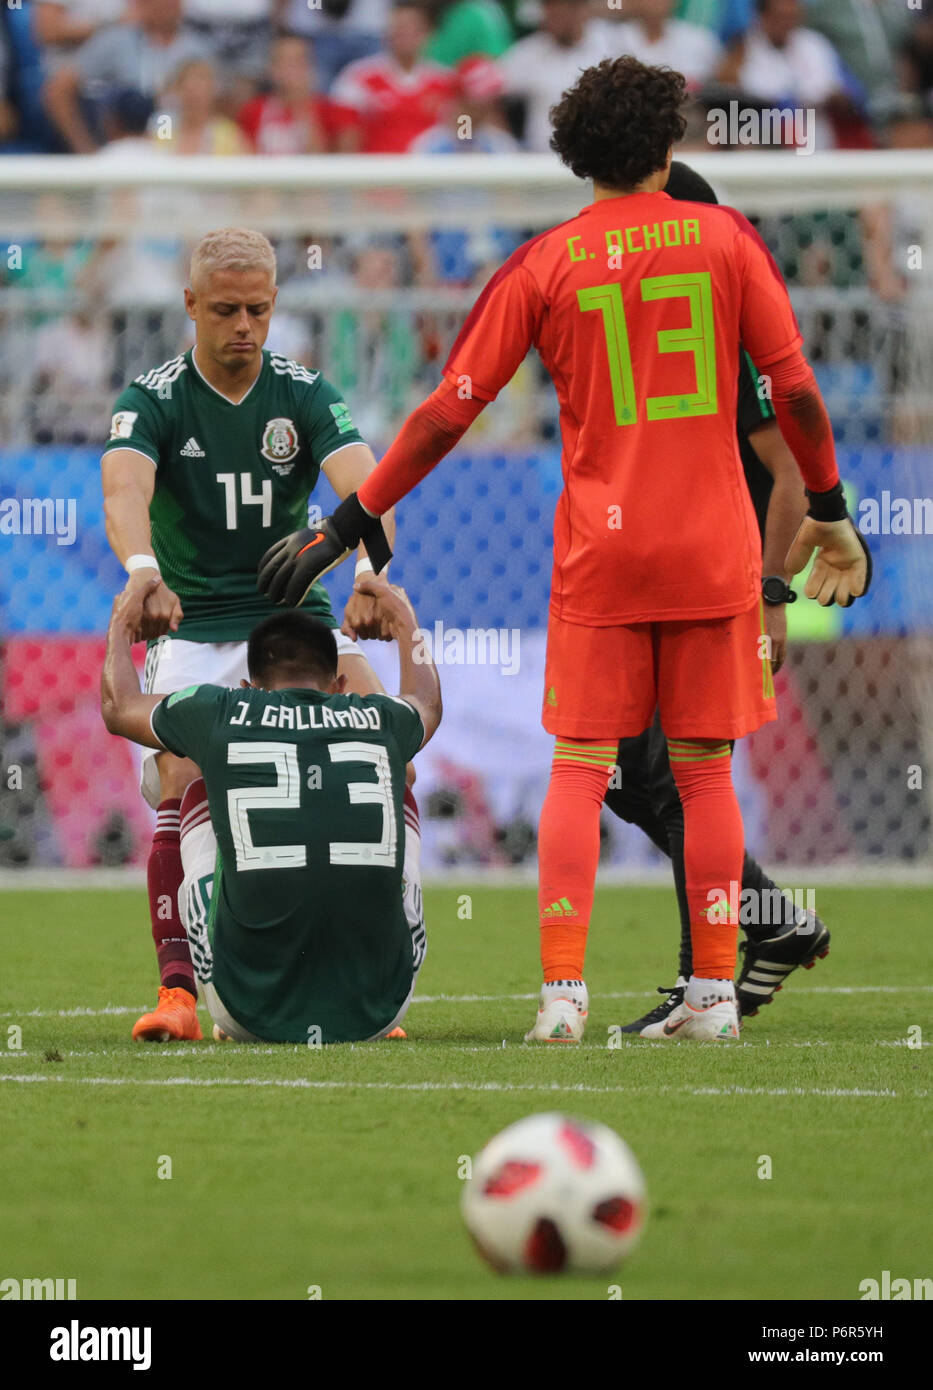 Samara, Russia. 02nd July, 2018. Soccer, World Cup 2018, Final round - round of 16: Mexico vs. Brazil at the Samara stadium: Mexico's Jesus Gallardo sitting in the field after the defeat next to teammate Chicharito (Javier Hernandez, top) and goalkeepoer Guillermo Ochoa (R). Credit: Christian Charisius/dpa/Alamy Live News Stock Photo